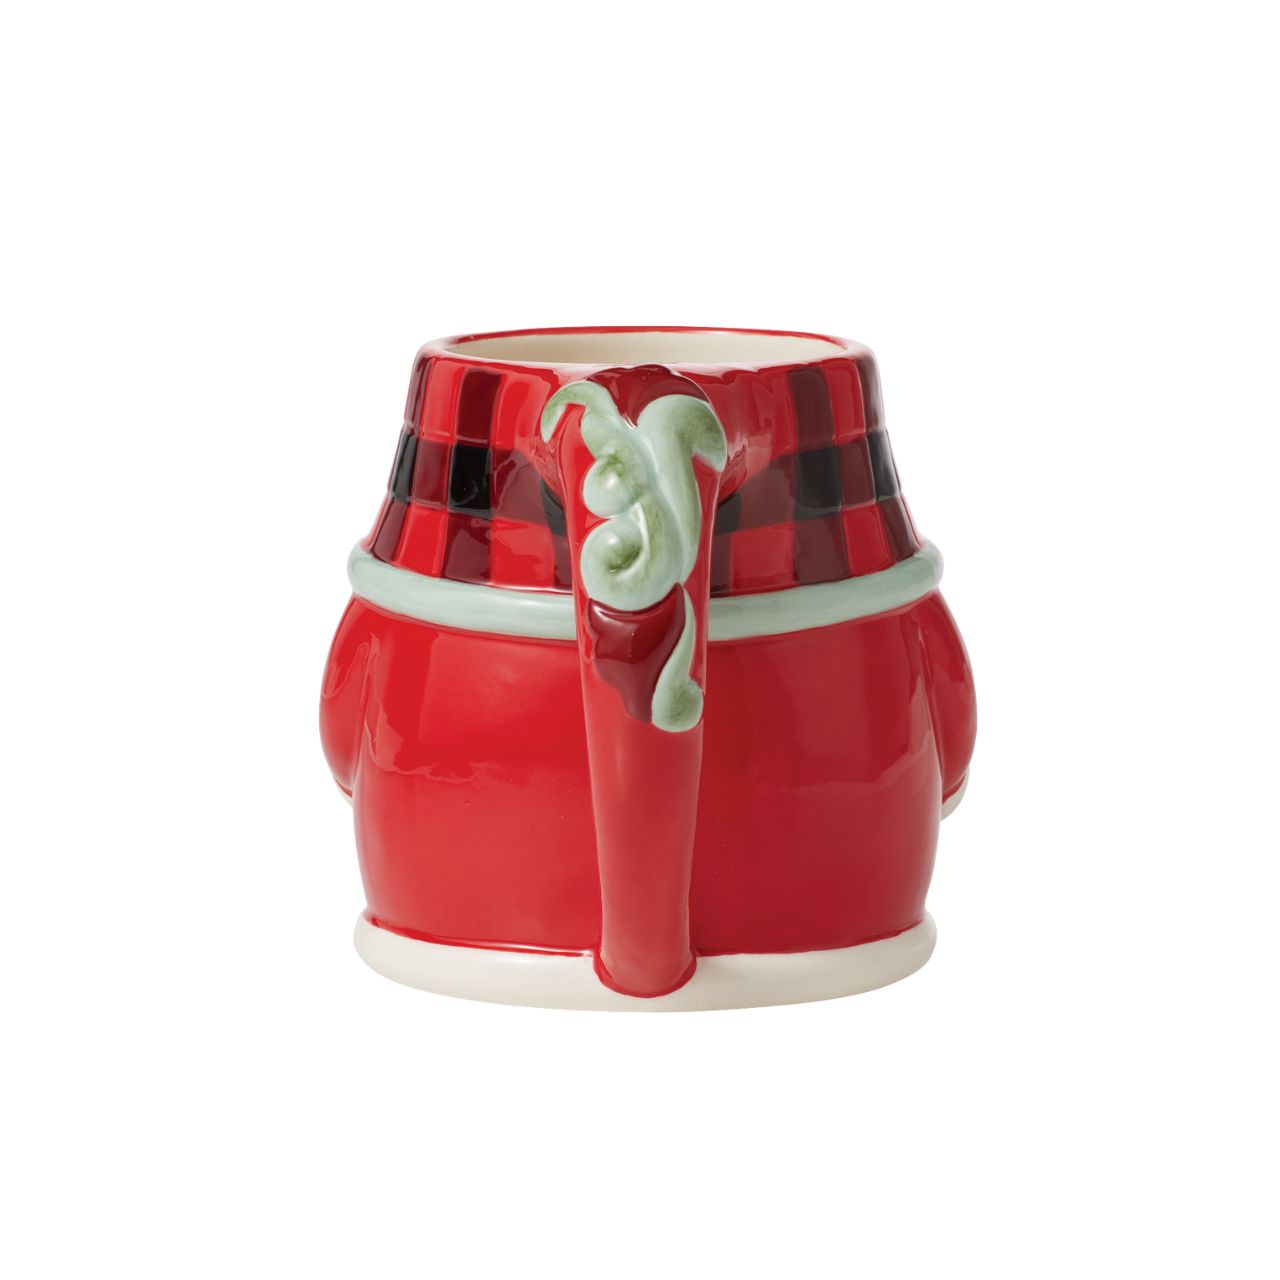 Heartwood Creek Highland Glen Mug  Designed by award winning artist Jim Shore as part of the Heartwood Creek Highland Glen Collection, hand crafted using high quality cast stone and hand painted, this festive mug is perfect for the Christmas season.